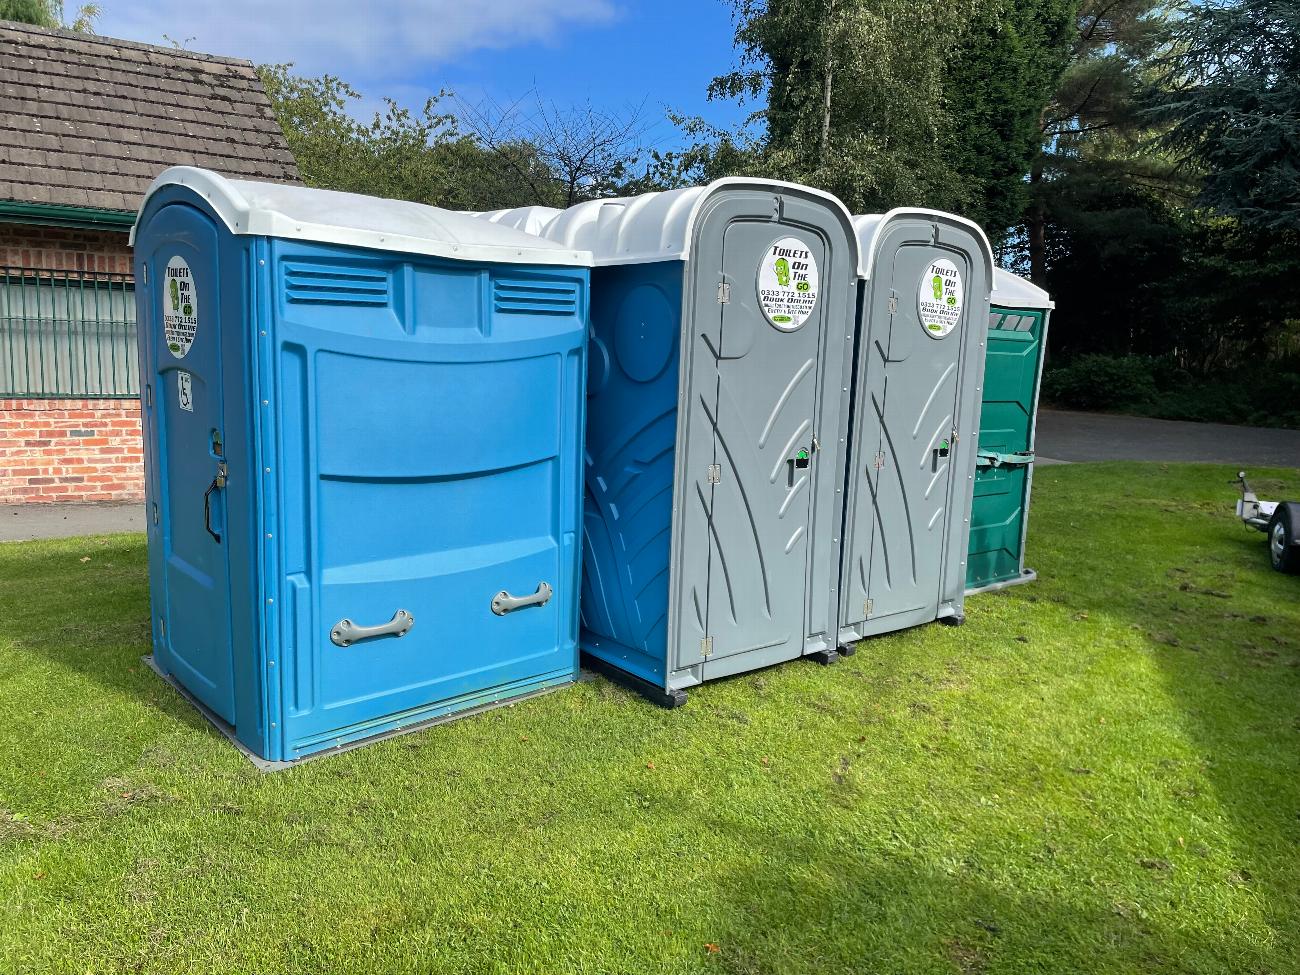 Gallery | Portable Toilet Loo Hire Rental Company in North West uk and Manchester gallery image 38